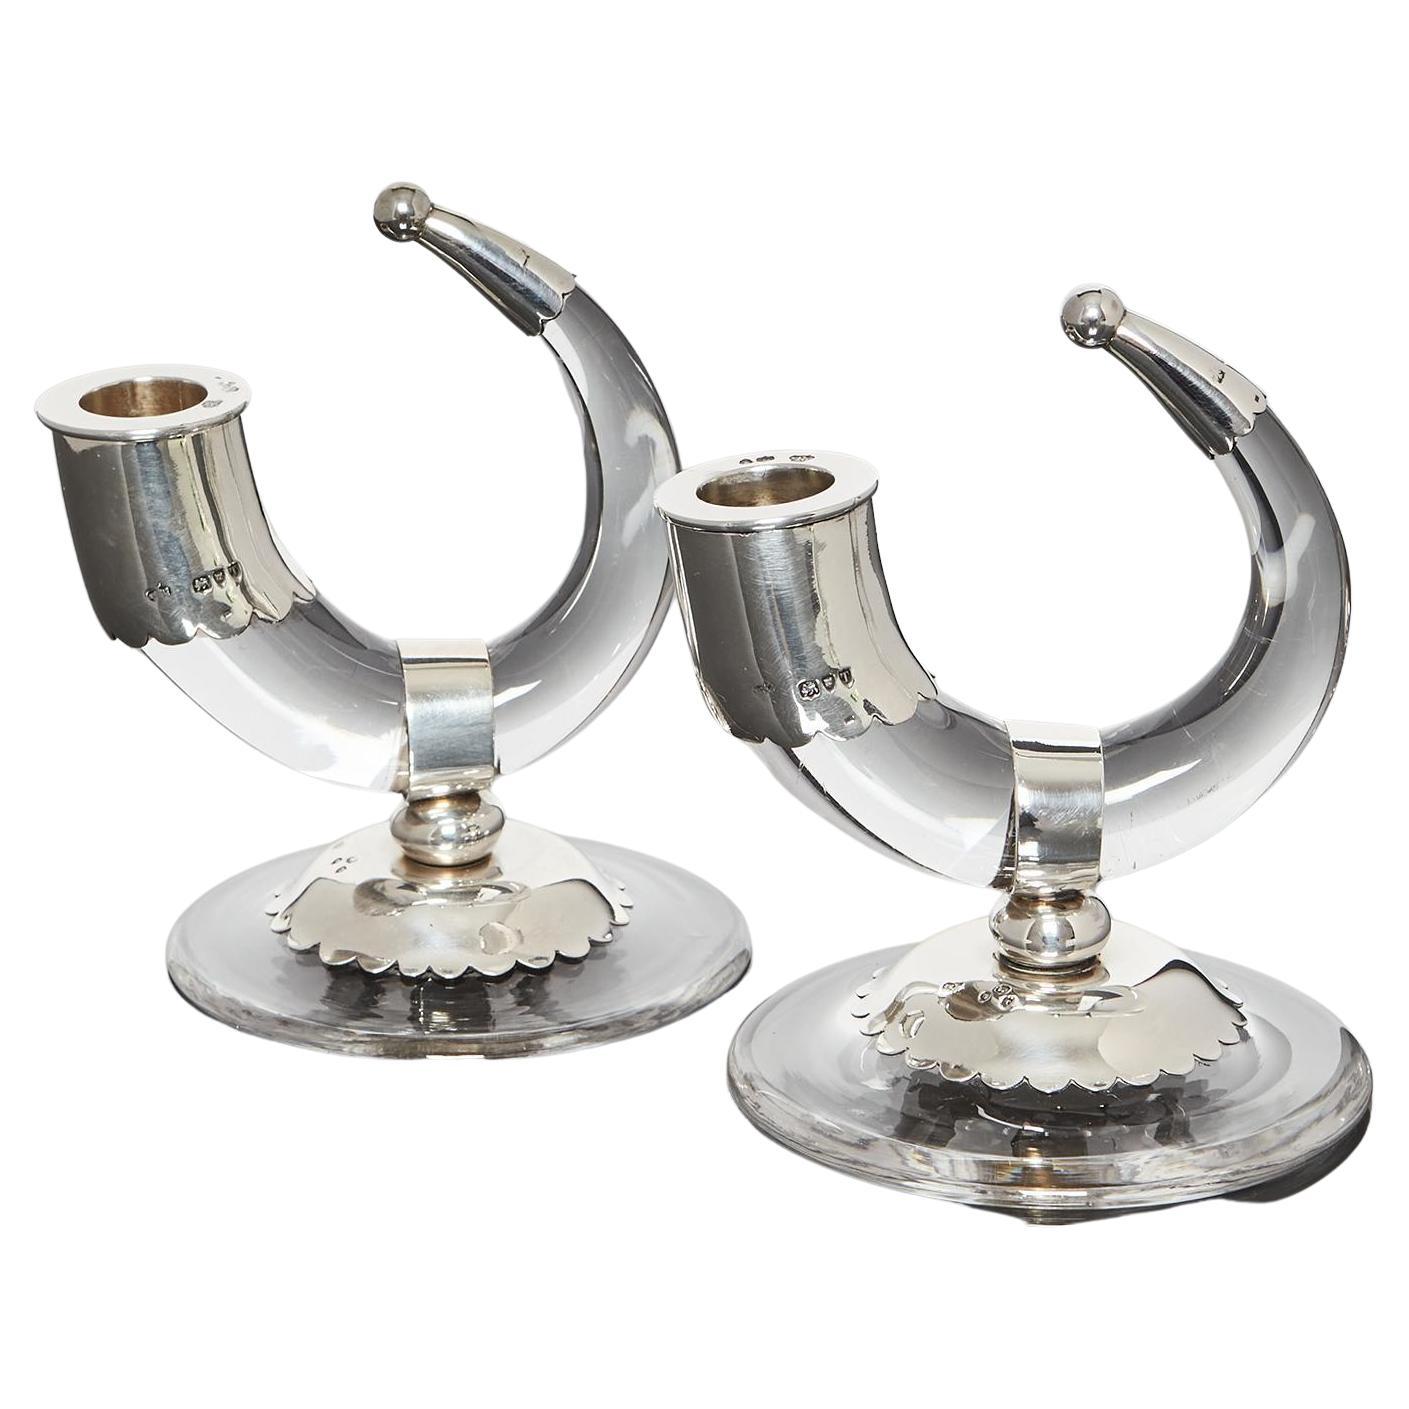 A most unusual and decorative pair of antique horn-shaped glass candlesticks fitted with hallmarked sterling silver mounts. The nozzles remove for easy cleaning.